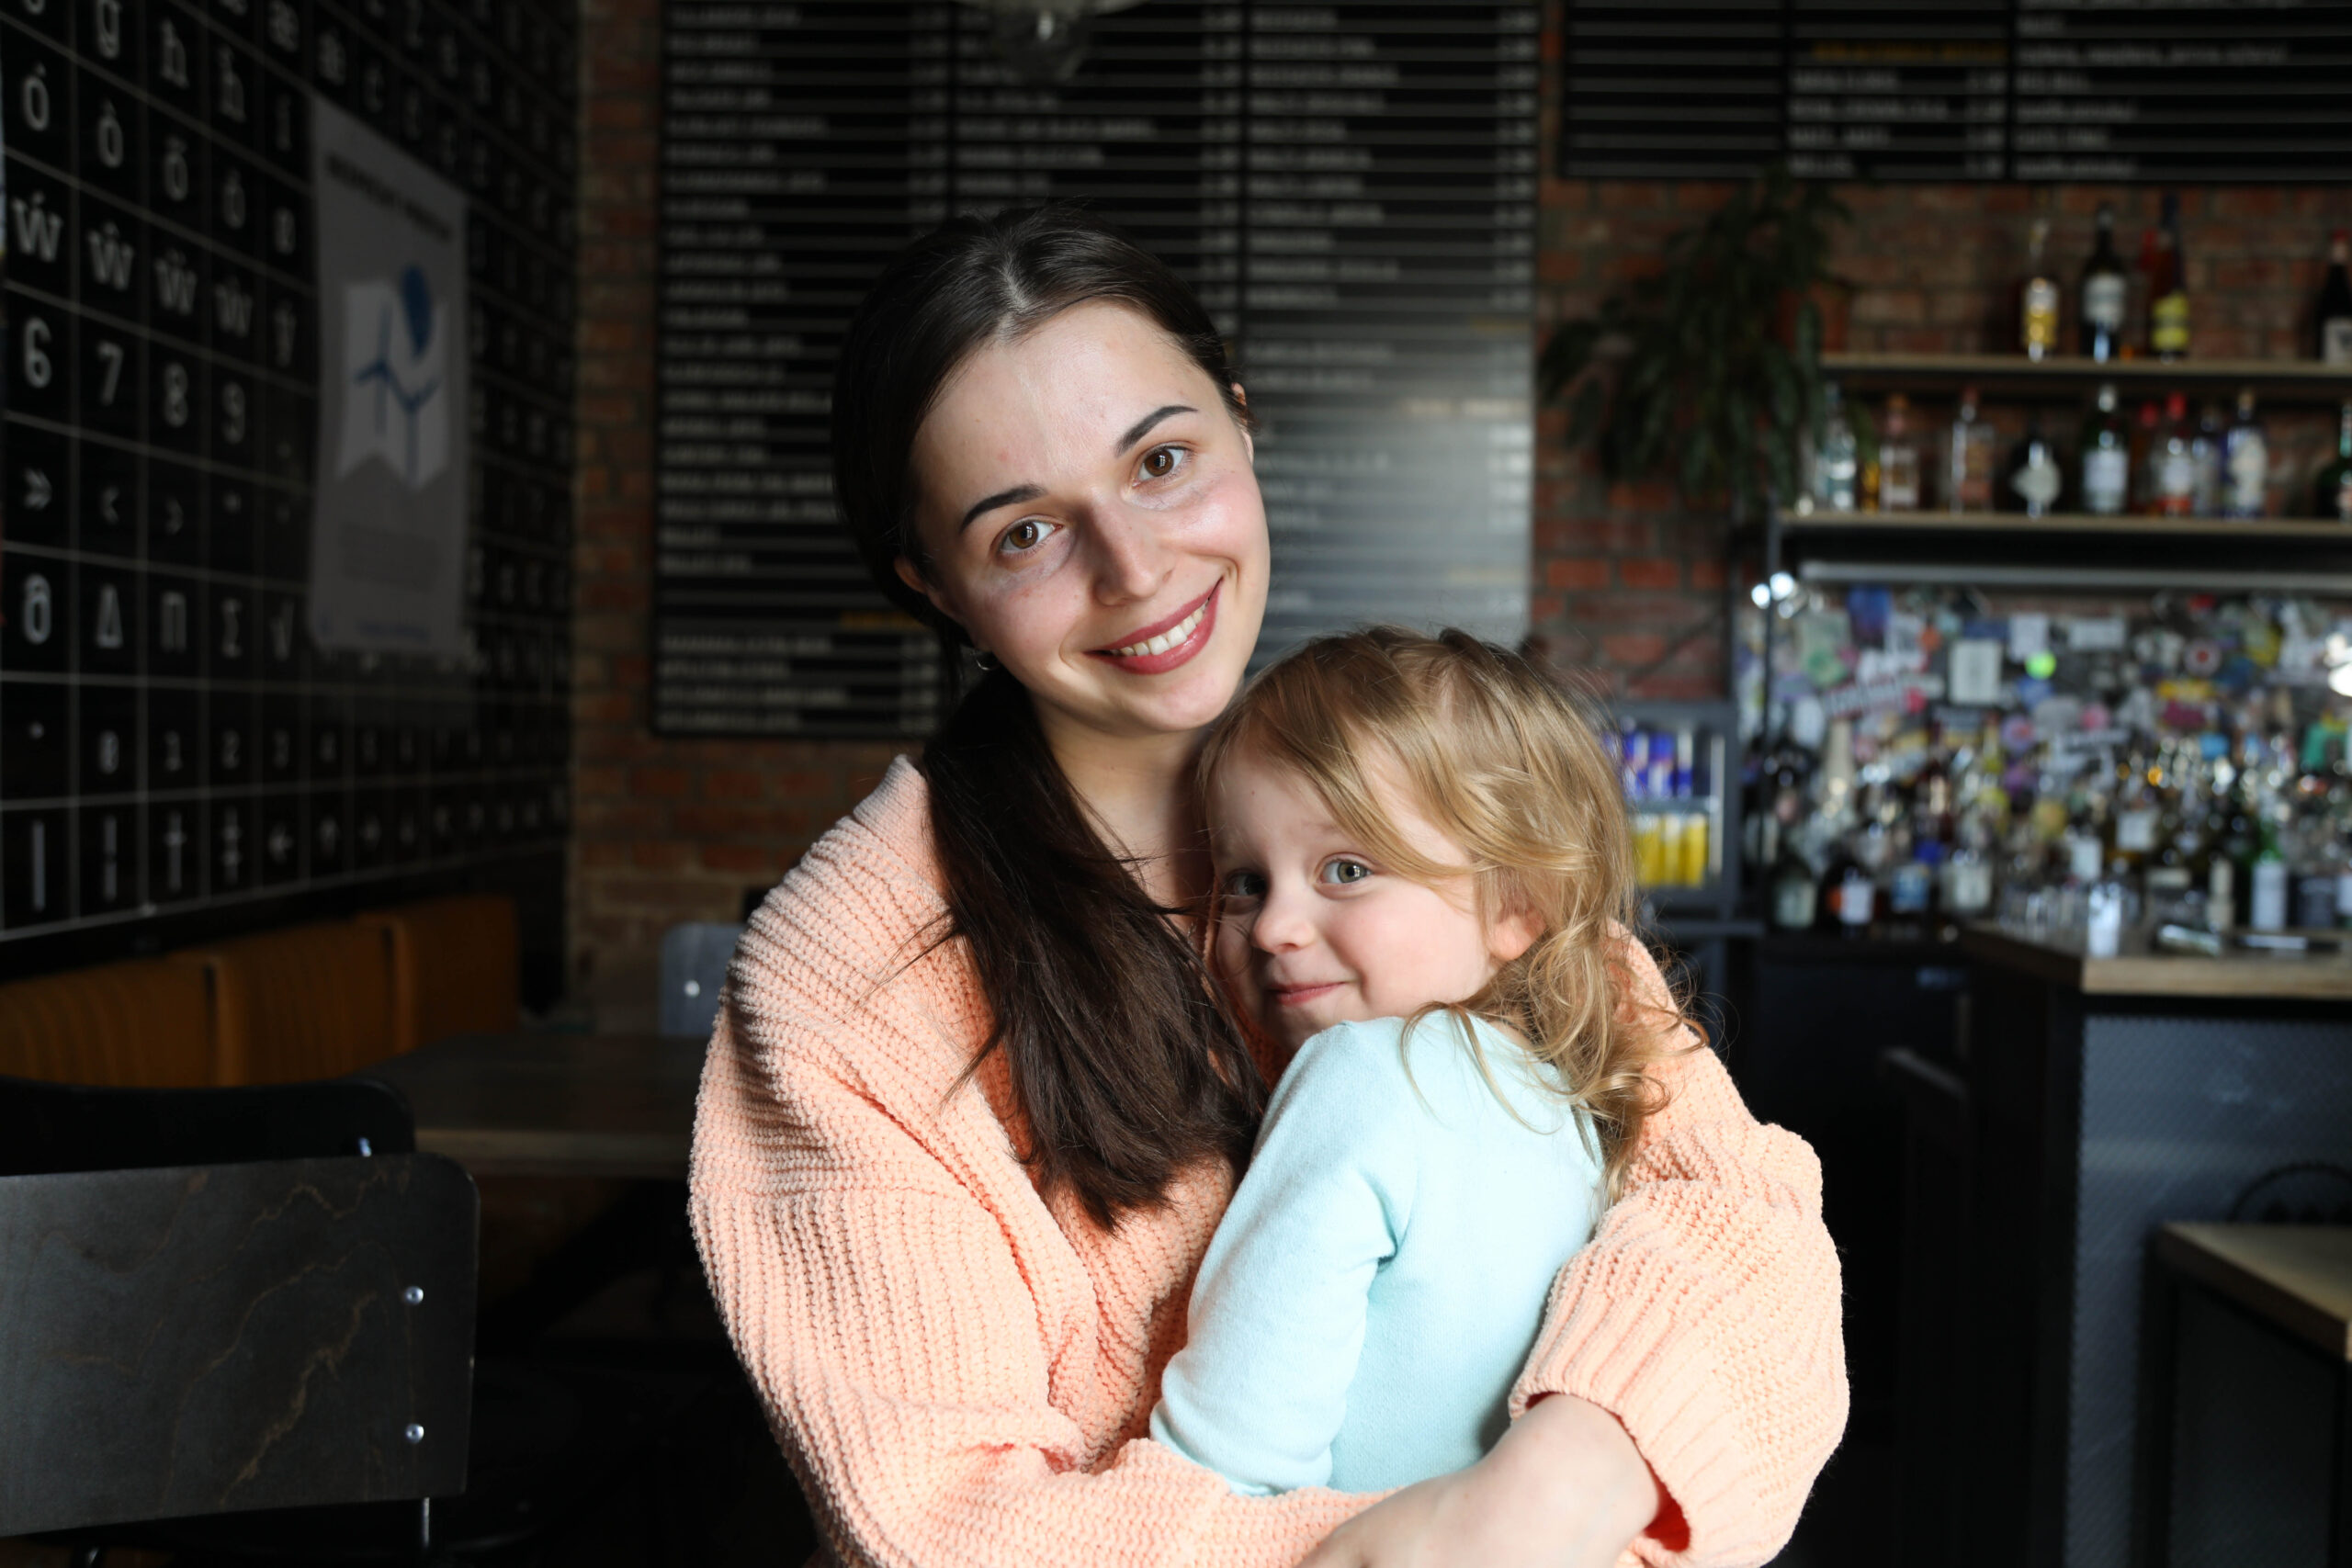 Victoria, 31, together with her daughter Olivia, 3,5. Victoria is from Kharkiv Ukraine. She arrived to Slovakia in 2018 and is a psychologist working on child-inclusion. When Russia's full-scale invasion of Ukraine broke out in February 2022, and refugees started arriving to Slovakia, Victoria saw the need for a safe space for mothers and children. In April 2022, she opened up her centre "Happiness" where children and mothers can participate in occupational therapy activities to address mental health concerns. "My job is to create a space where mother and their children can feel calm" she said. ; The majority of the refugees who crossed the border into Slovakia are women, many of them with young children.